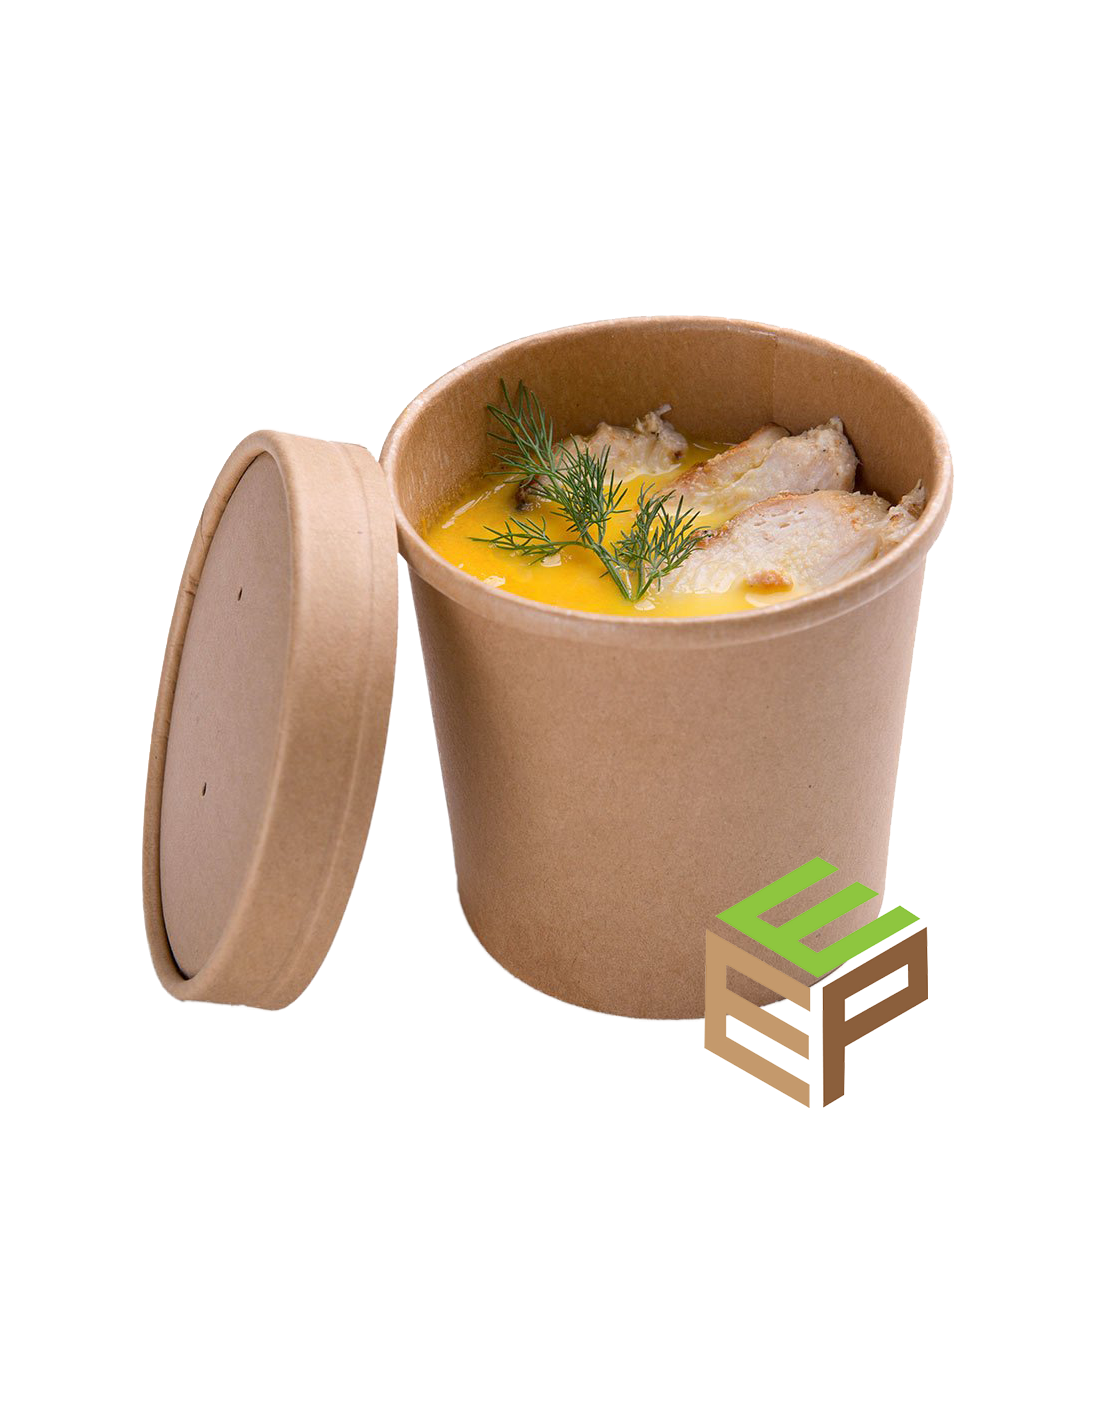 Bol soupe - Pot a soupe carton - Emballage soupe jetable | We Packing